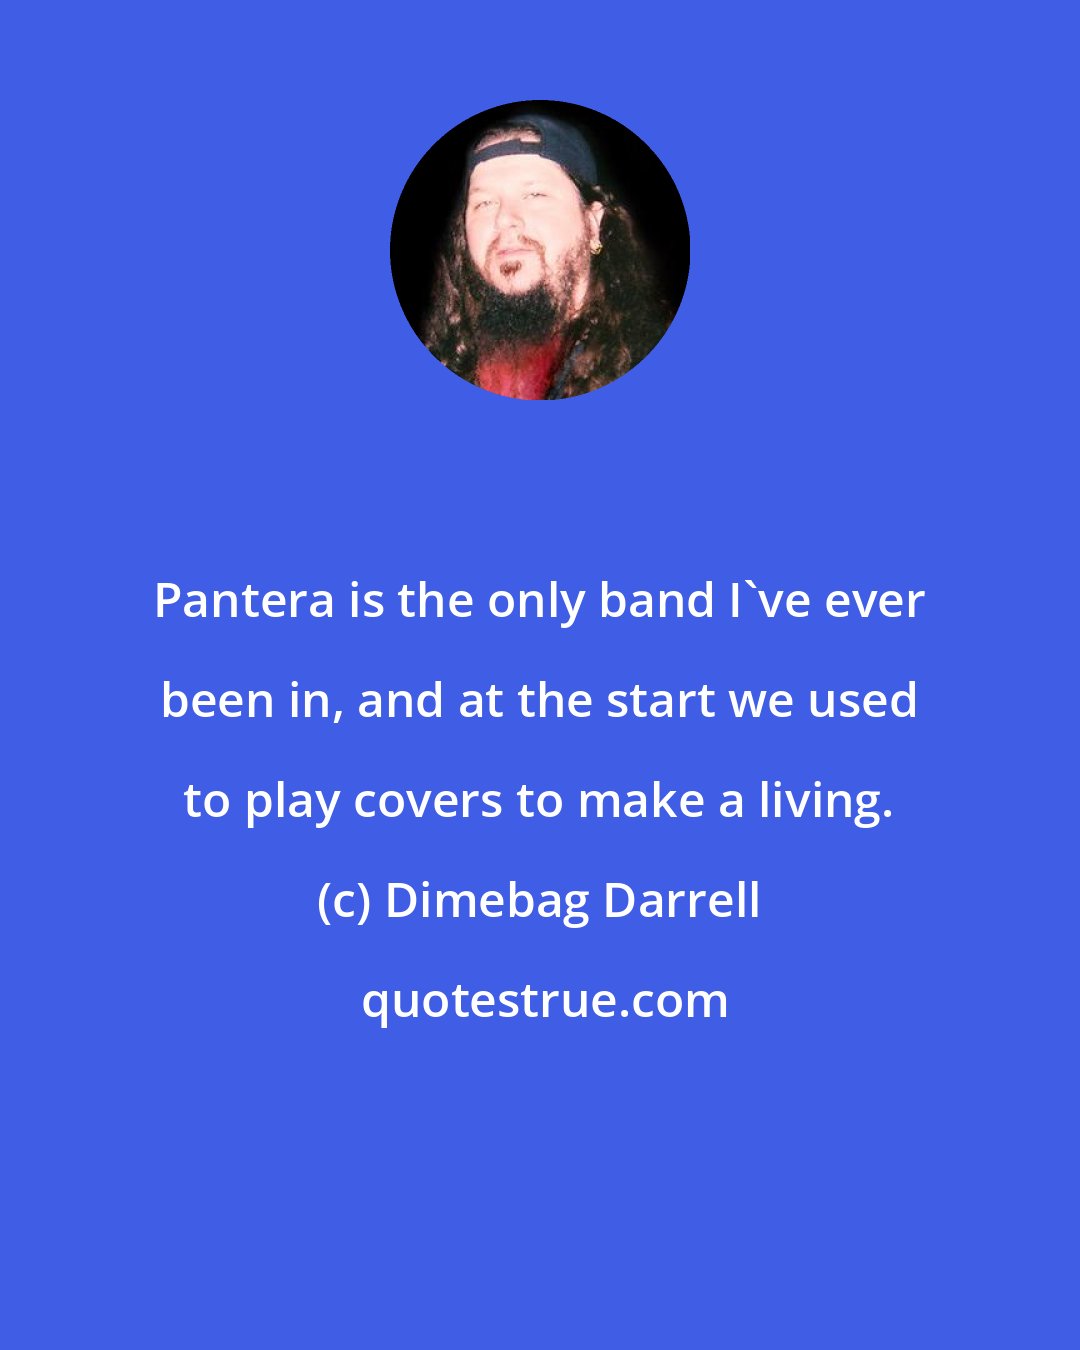 Dimebag Darrell: Pantera is the only band I've ever been in, and at the start we used to play covers to make a living.